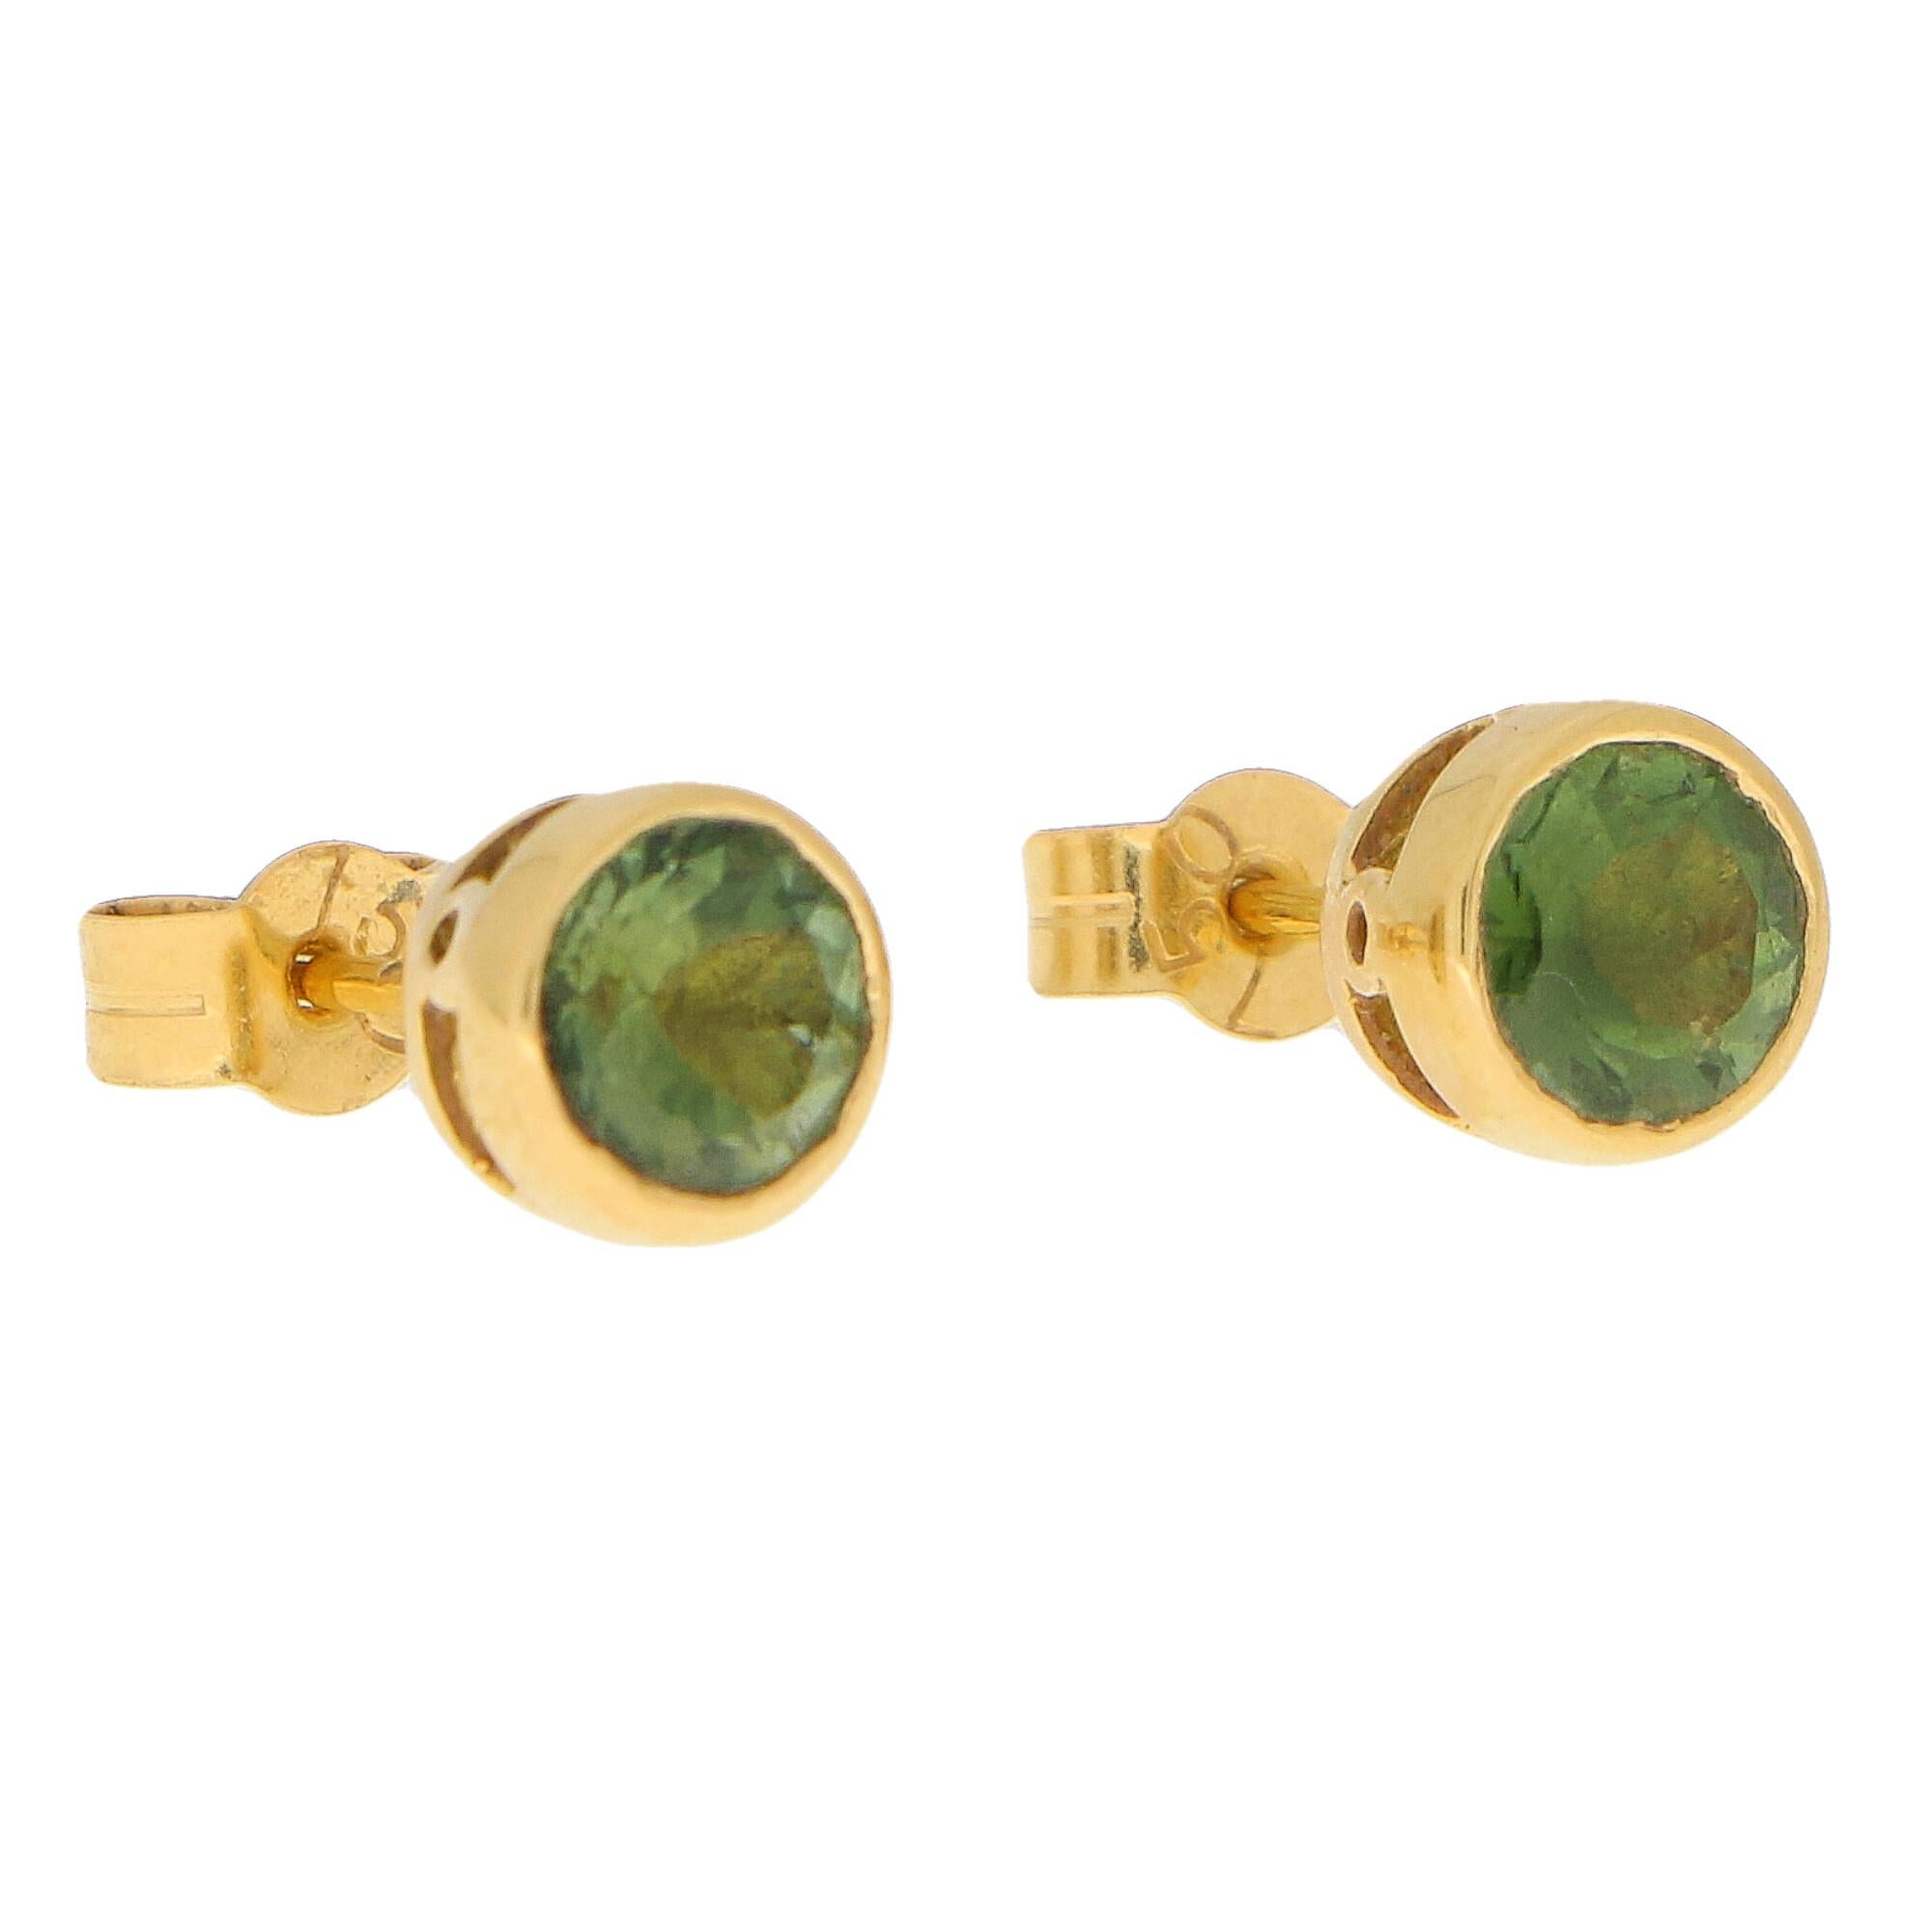 A lovely pair of green peridot stud earrings set in 18k yellow gold. 

Each earring is centrally rub over set with a round cut peridot of a lovely green colour. Each stone is set in a slightly raised openwork setting and the studs look beautiful